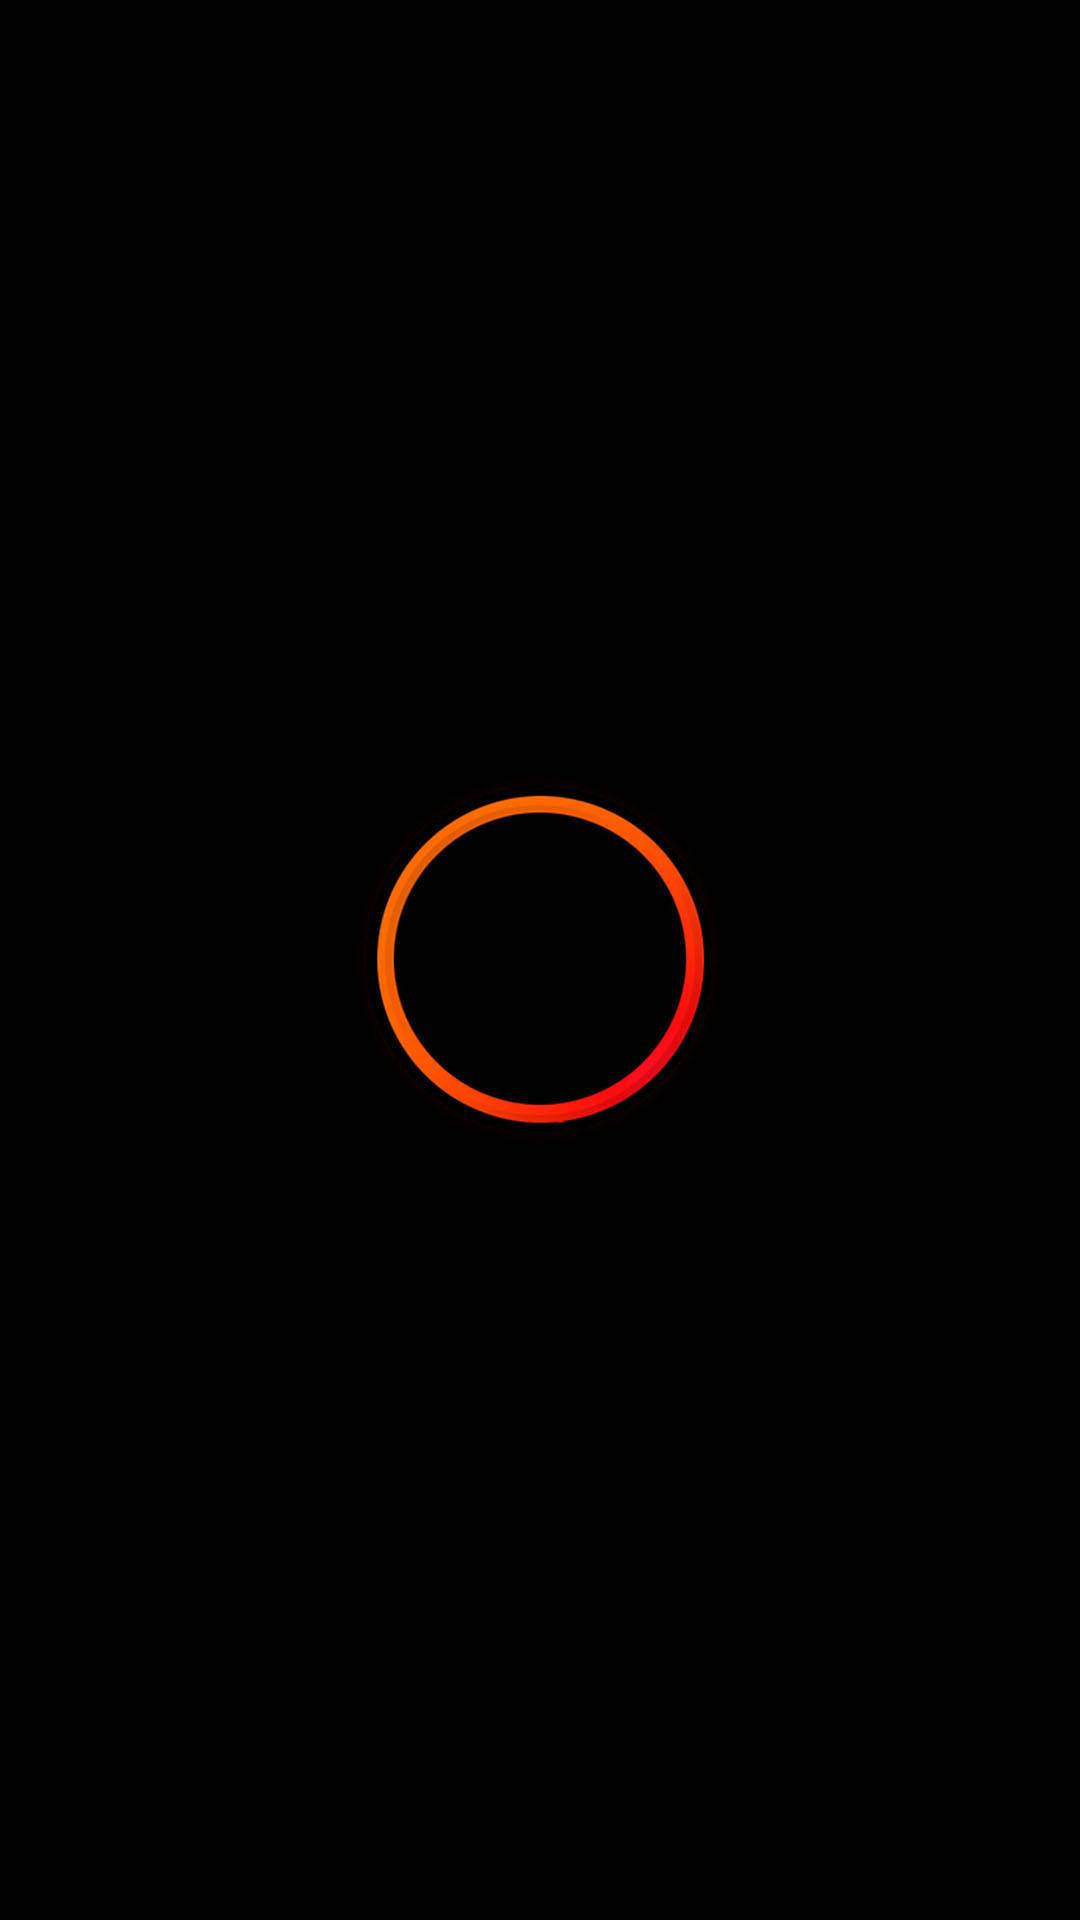 Red Circle Minimalist Android Background